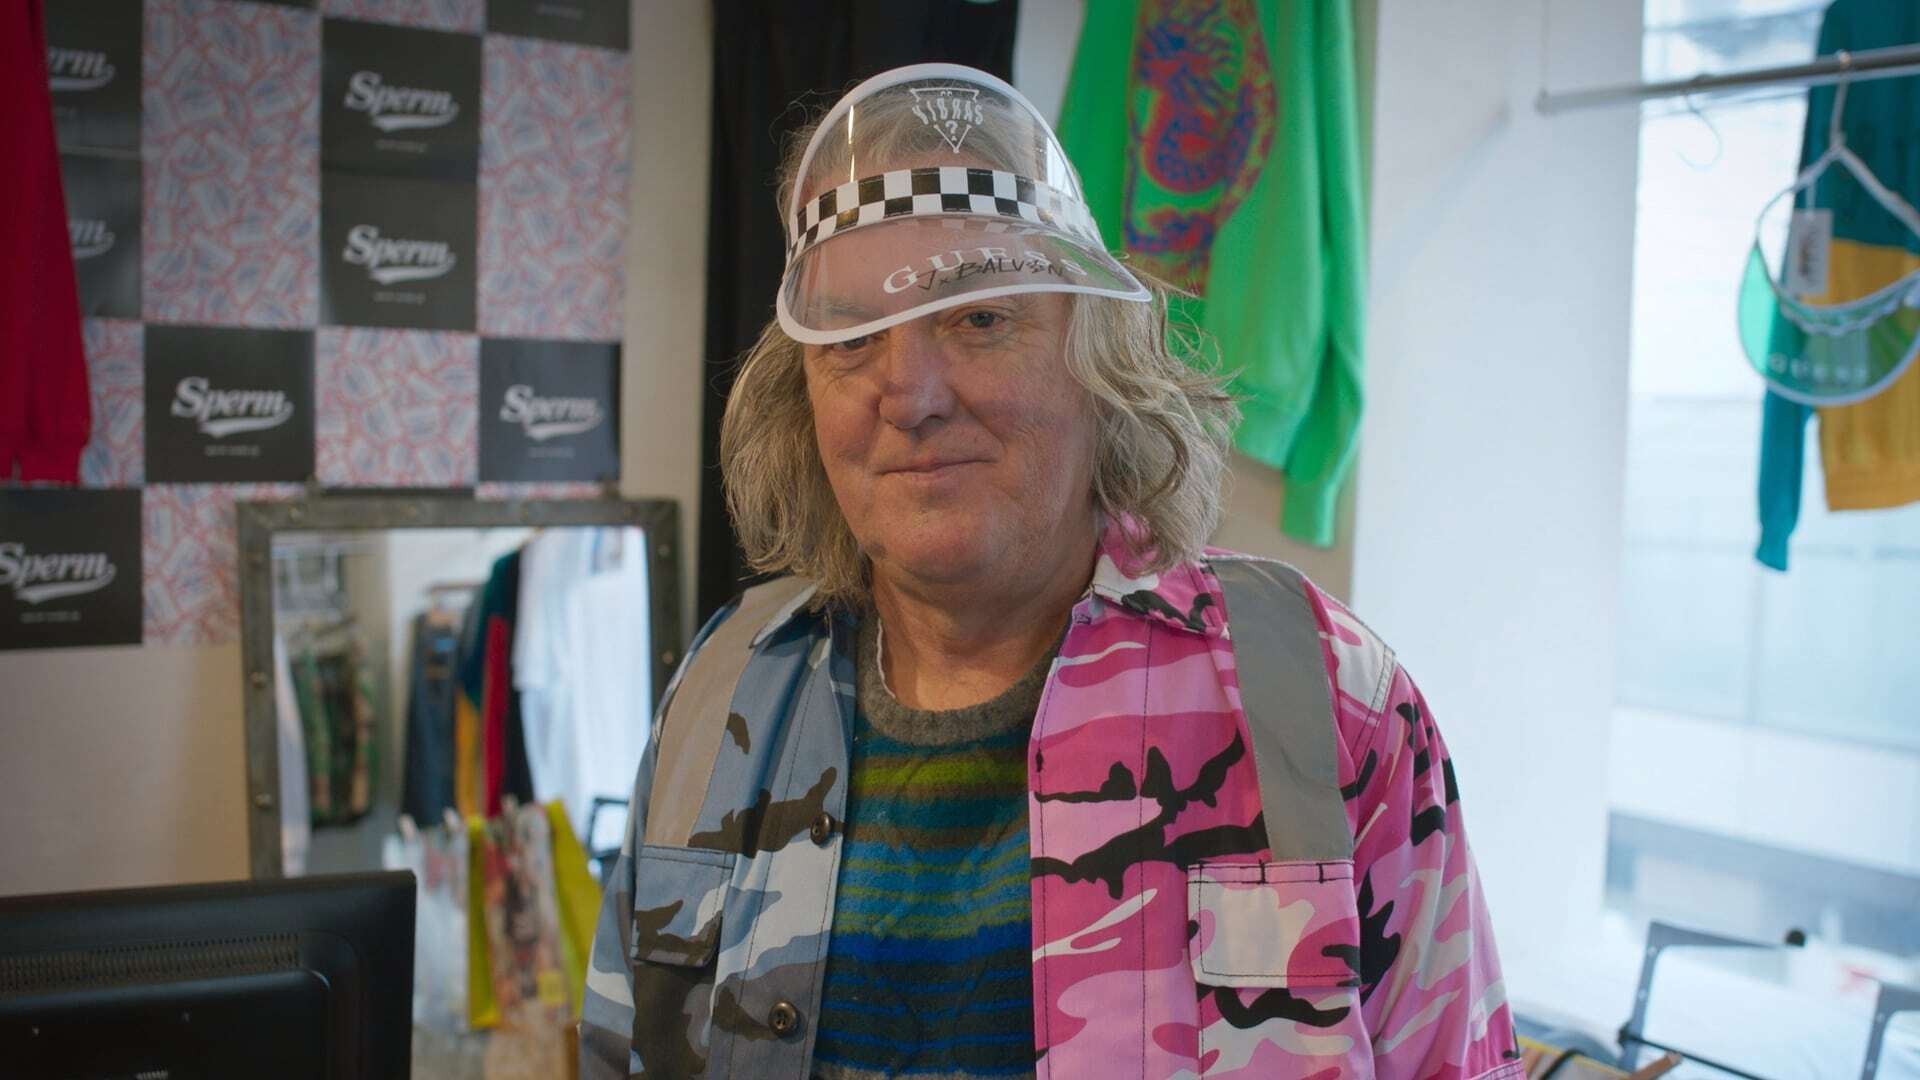 James May: Our Man in... / Джеймс Мэй: Наш человек...